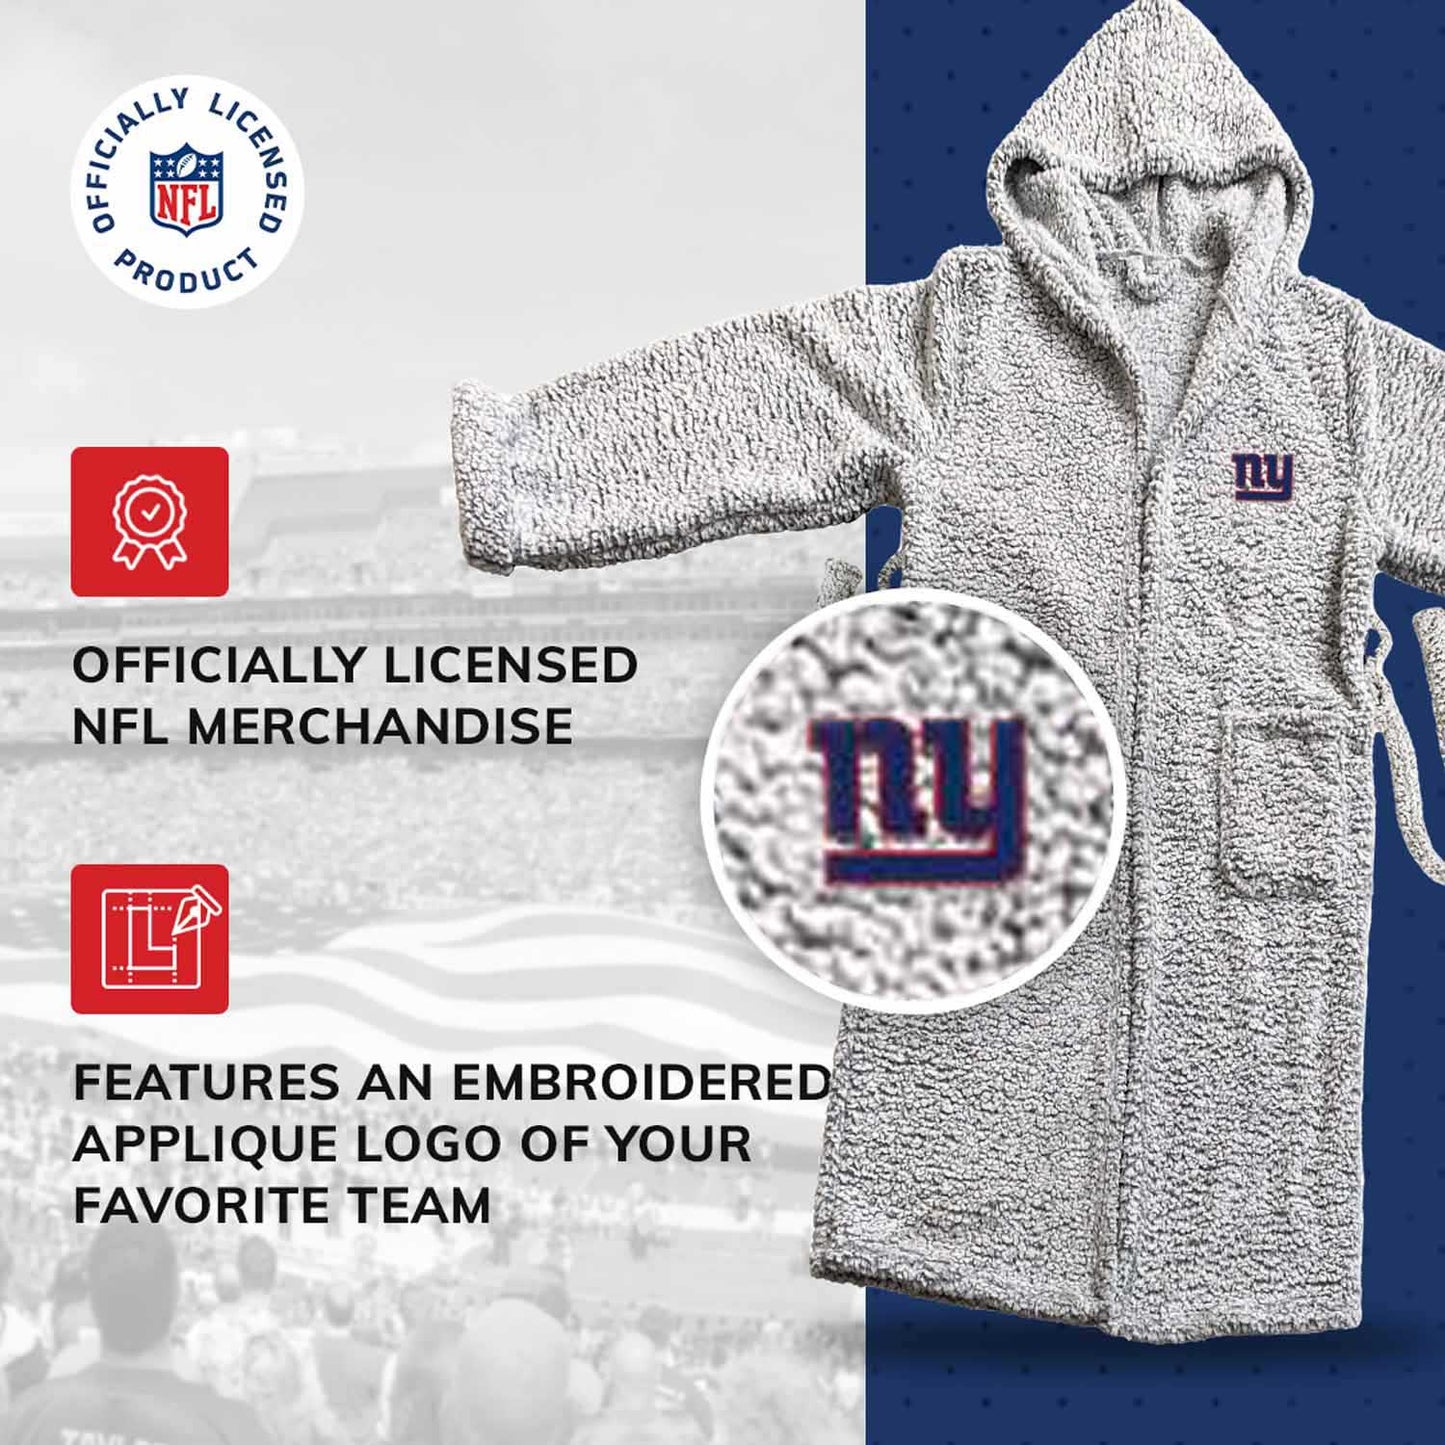 New York Giants NFL Plush Hooded Robe with Pockets - Gray